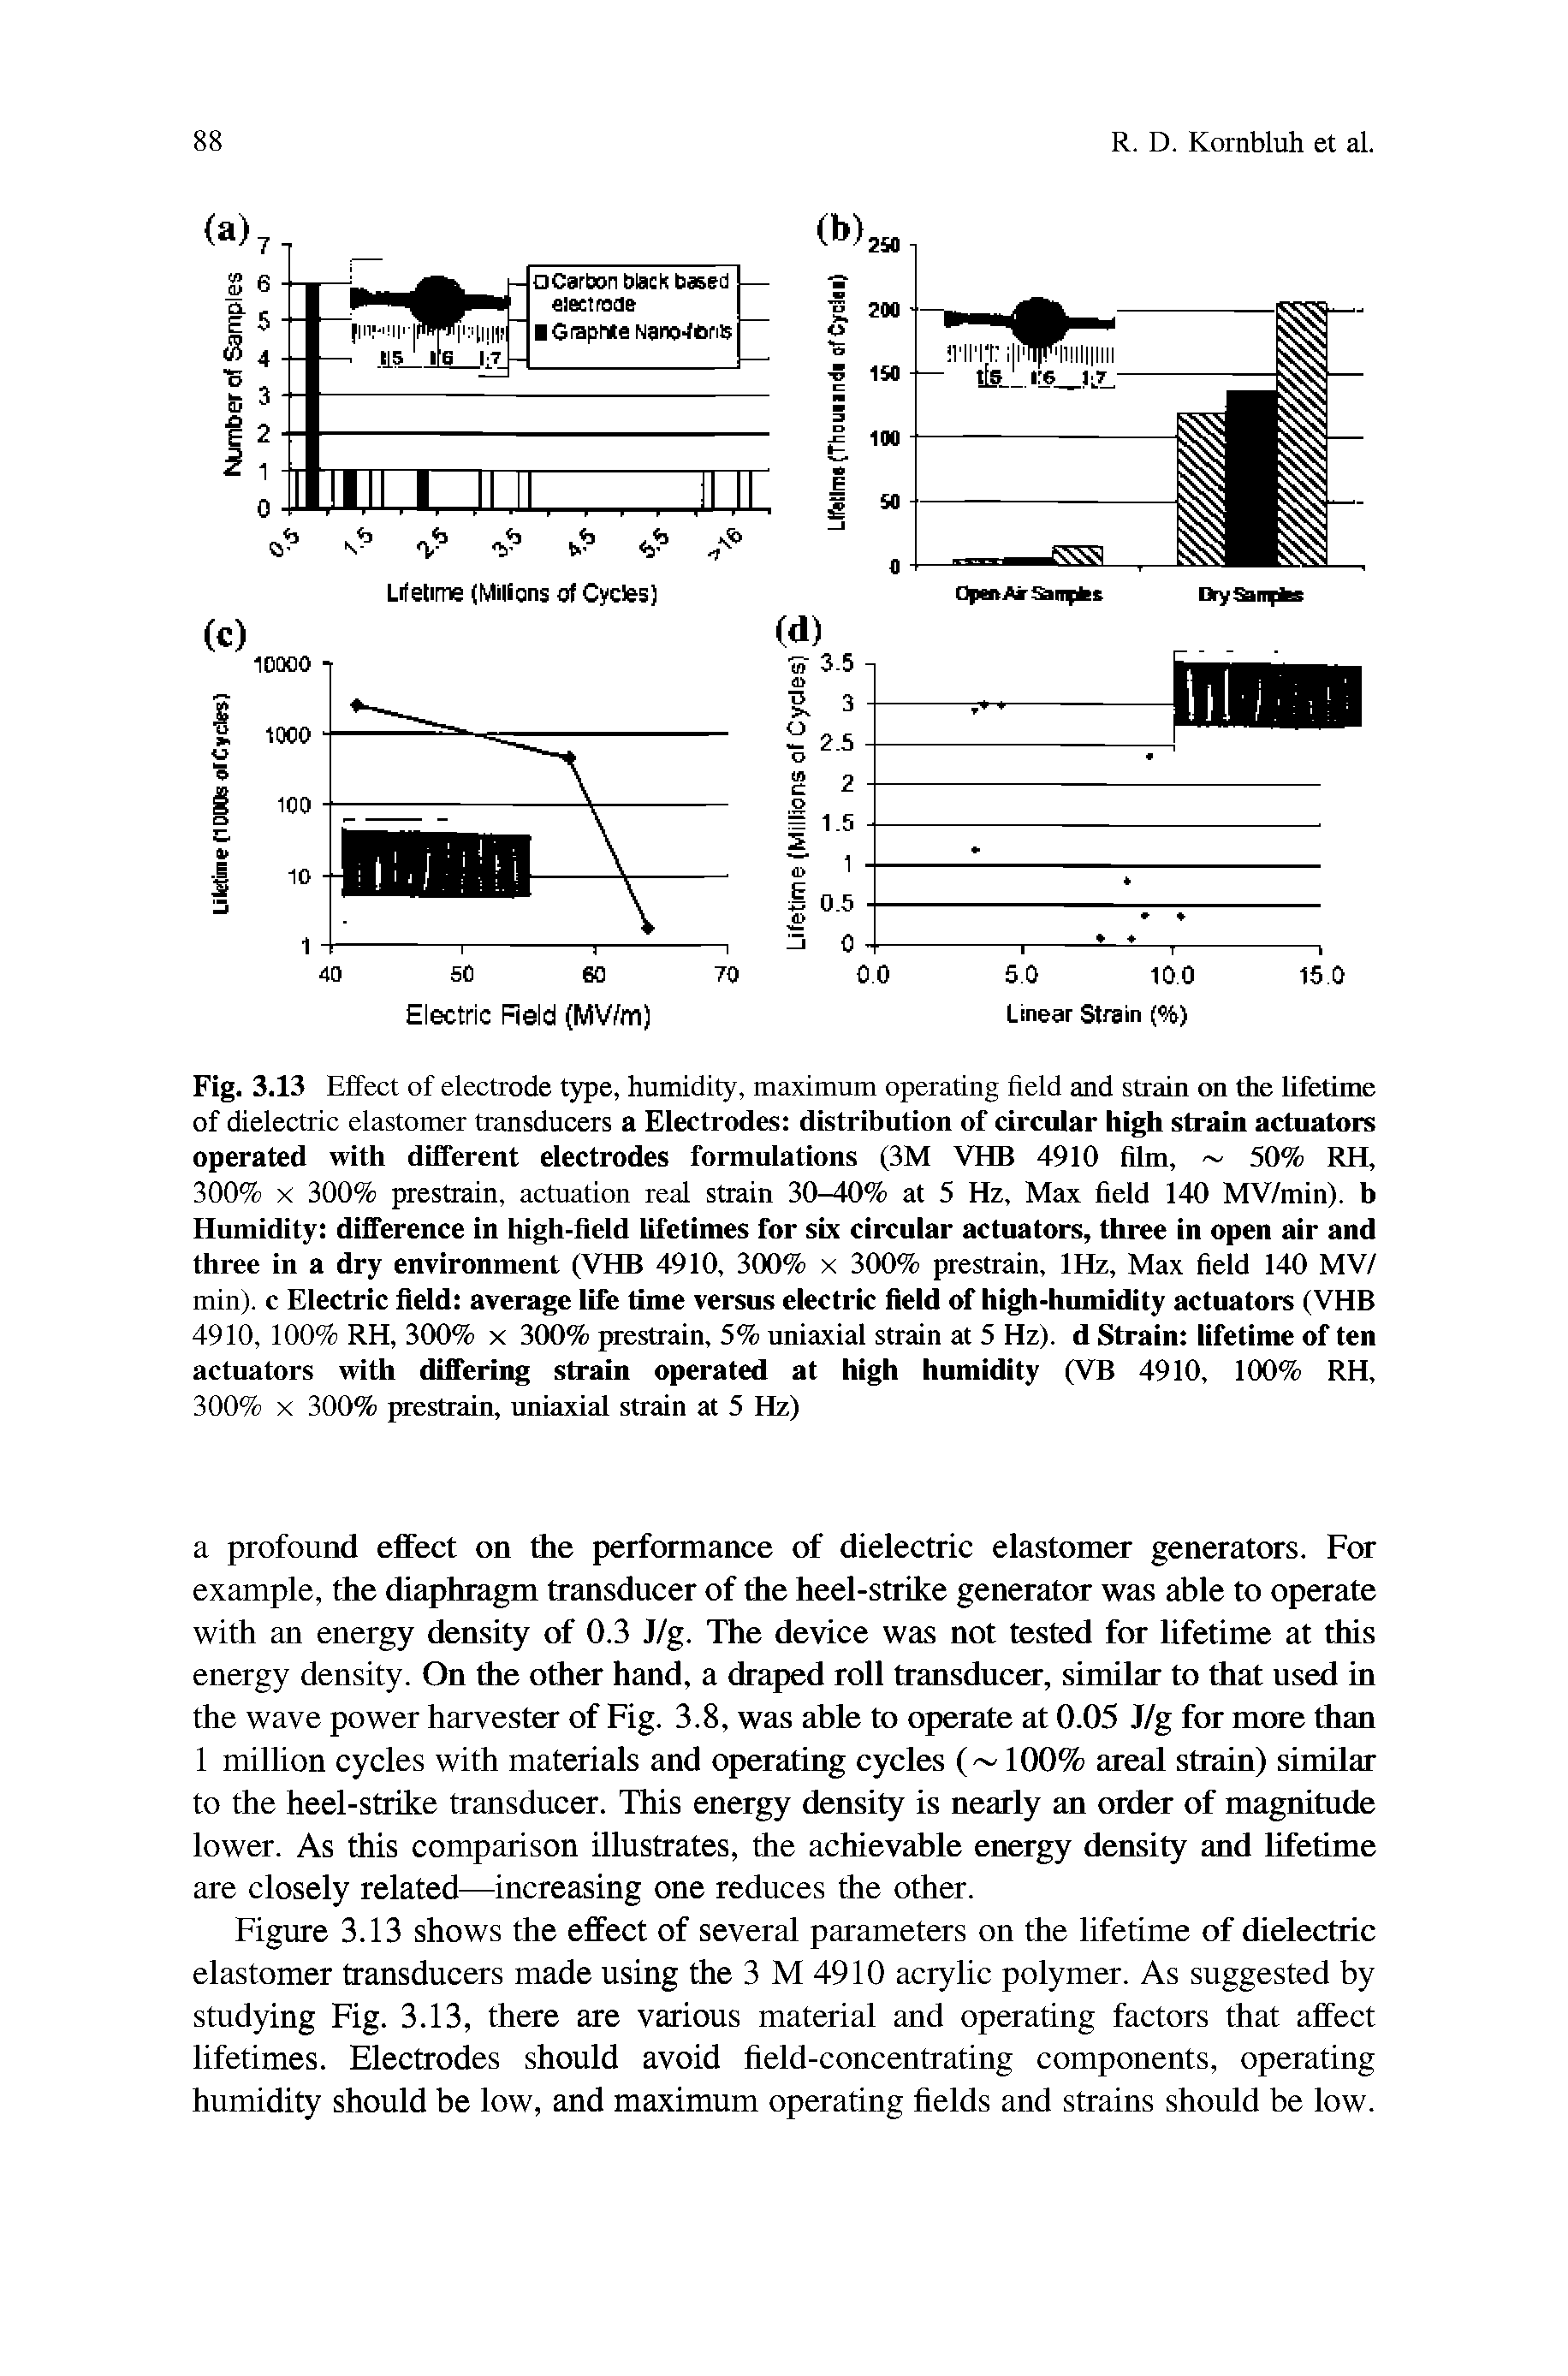 Fig. 3.13 Effect of electrode type, humidity, maximum operating field and strain on the lifetime of dielectric elastomer transducers a Electrodes distribution of circular high strain actuators operated with different electrodes formulations (3M VHB 4910 film, 50% RH, 300% X 300% prestrain, actuation real strain 30-40% at 5 Hz, Max field 140 MV/min). b Humidity difference in high-fleld lifetimes for six circular actuators, three in open air and three in a dry environment (VHB 4910, 300% x 300% prestrain, IHz, Max field 140 MV/ min), c Electric field average life time versus electric field of high-humidity actuators (VHB 4910, 100% RH, 300% x 300% prestrain, 5% uniaxial strain at 5 Hz), d Strain lifetime of ten actuators with differing strain operated at high humidity (VB 4910, 100% RH, 300% X 300% prestrain, uniaxial strain at 5 Hz)...